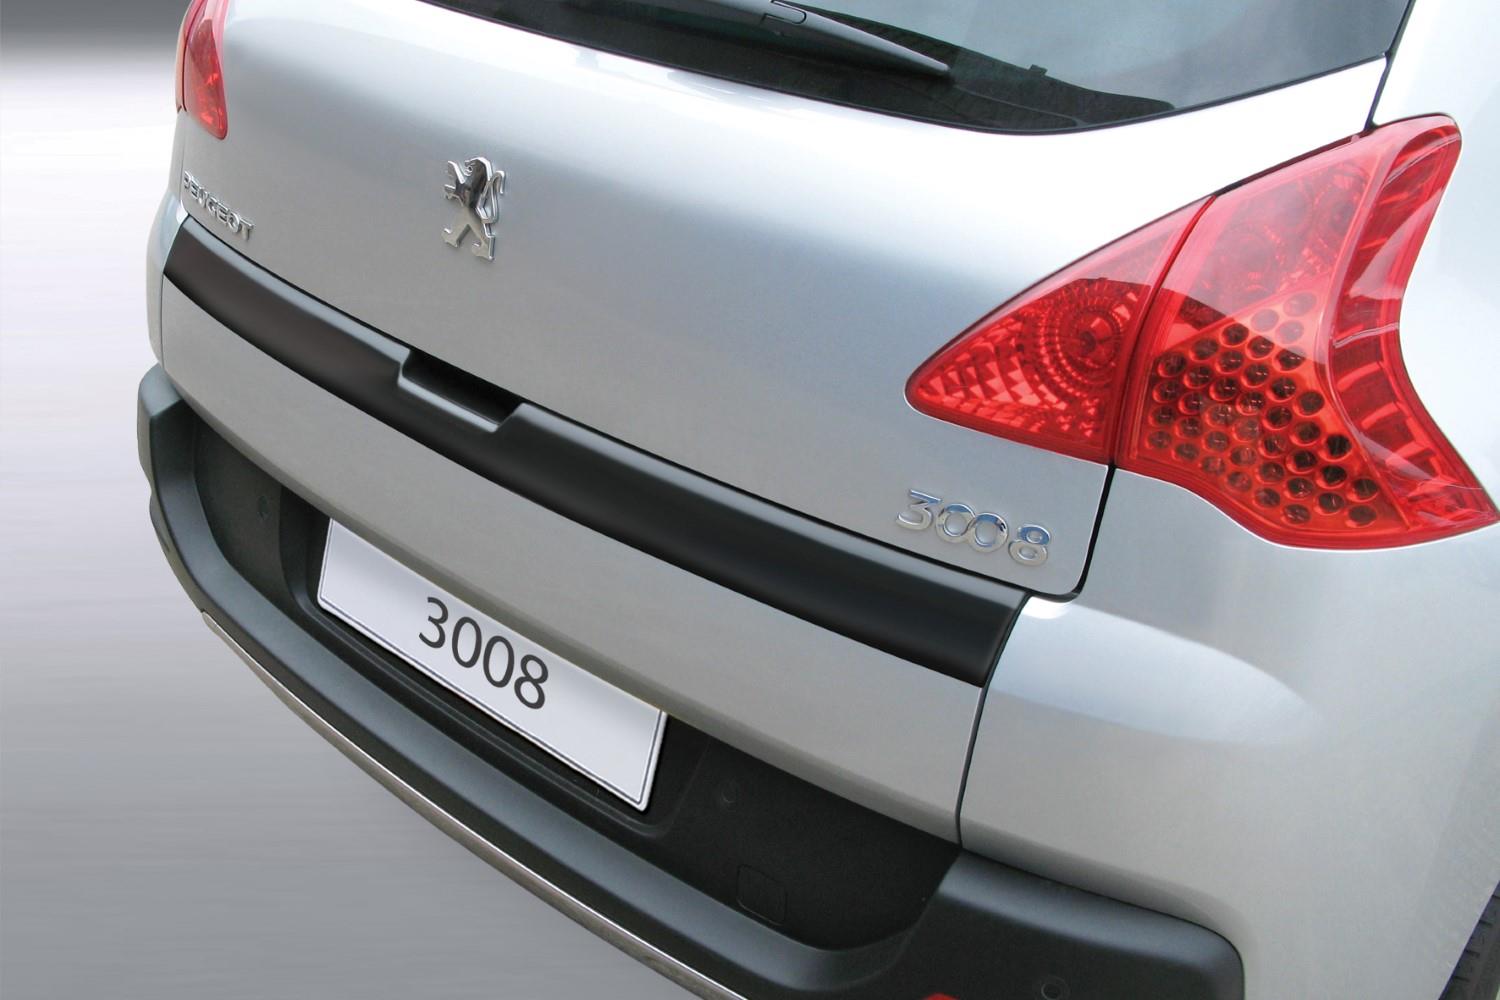 Details about    Peugeot 3008 SUV MK2 Carbon Style rear Bumper Protector